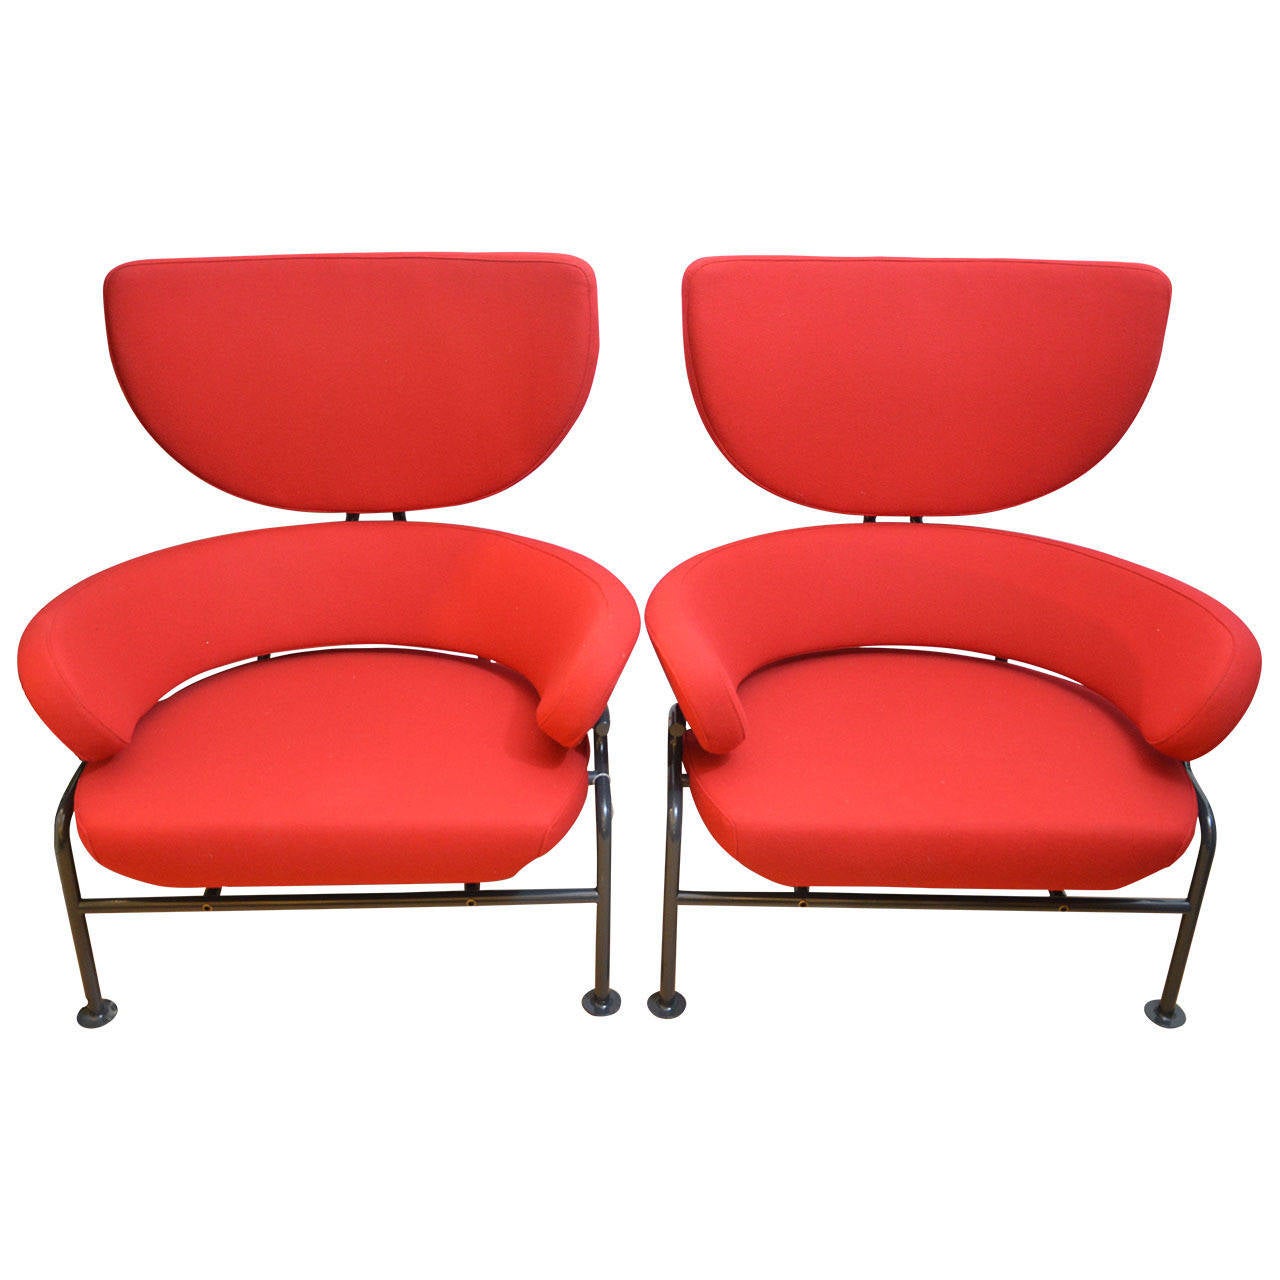 Pair of Armchairs "Pl19" (Tre Pezzi) by Franco Albini and Franca Helg For Sale